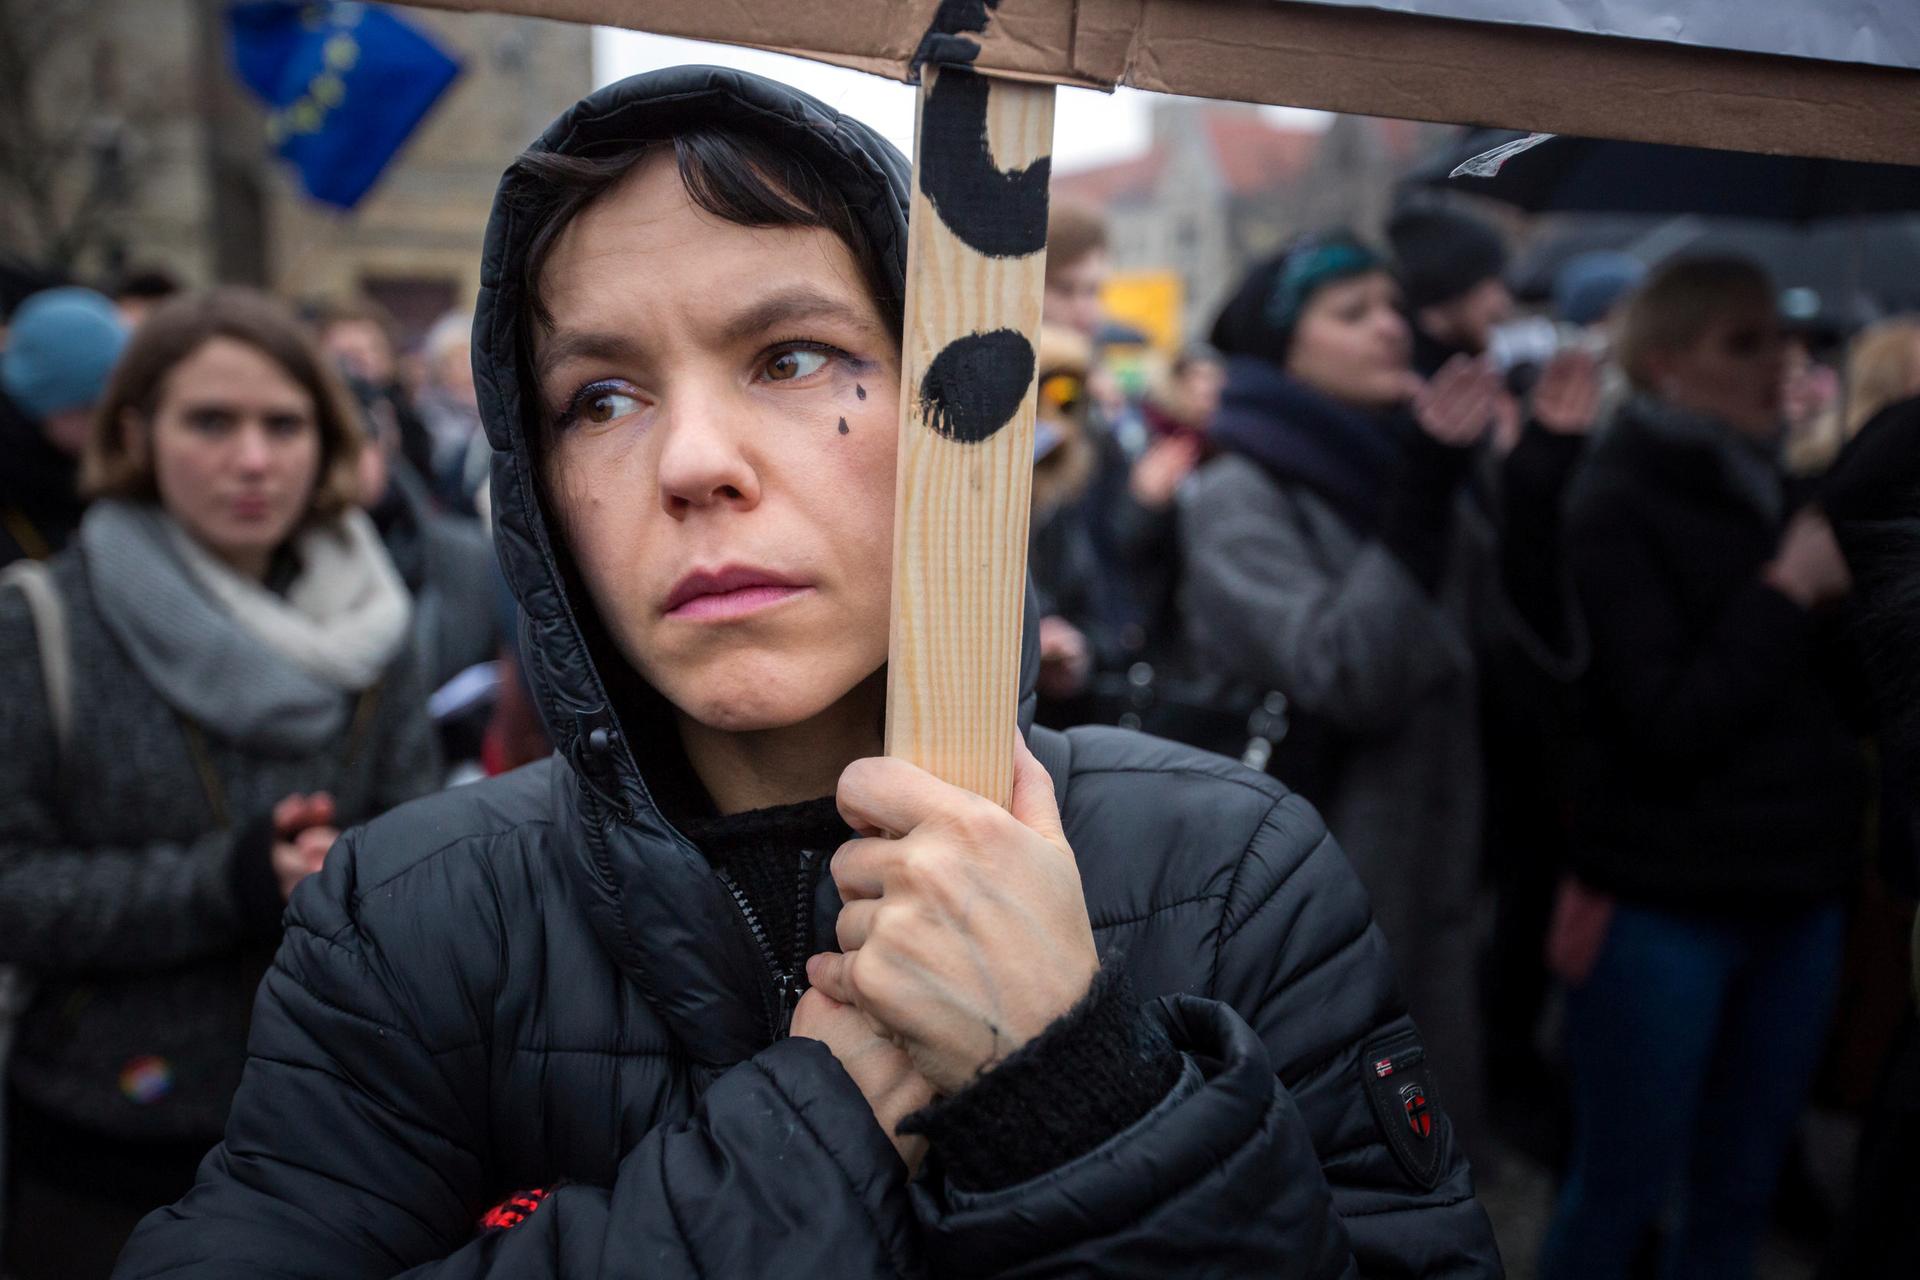 A woman protests against abortion restrictions carrying sign with tear drops painted on her face